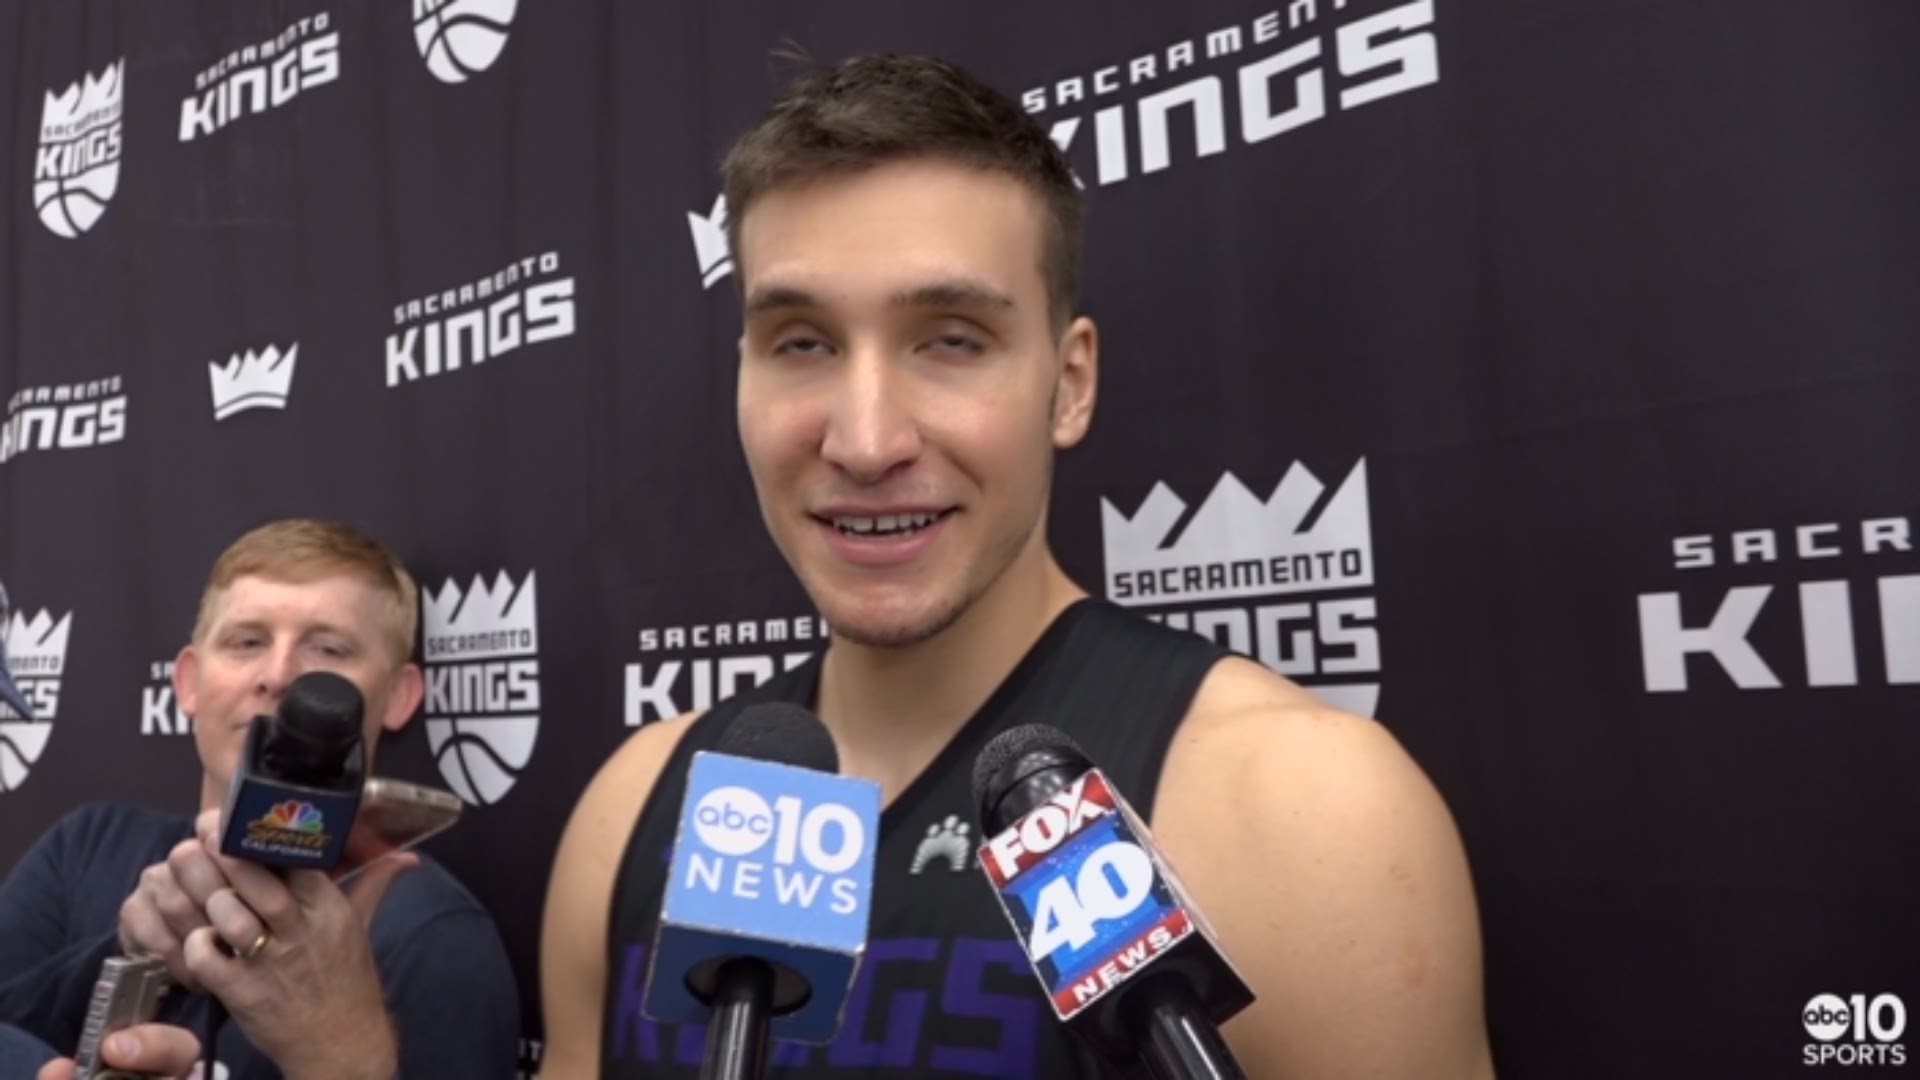 Following his second full practice, Kings guard Bogdan Bogdanovic discusses the possibility of making his season debut against the Toronto Raptors on Wednesday night in Sacramento, and what his challenge is in rejoining the team.